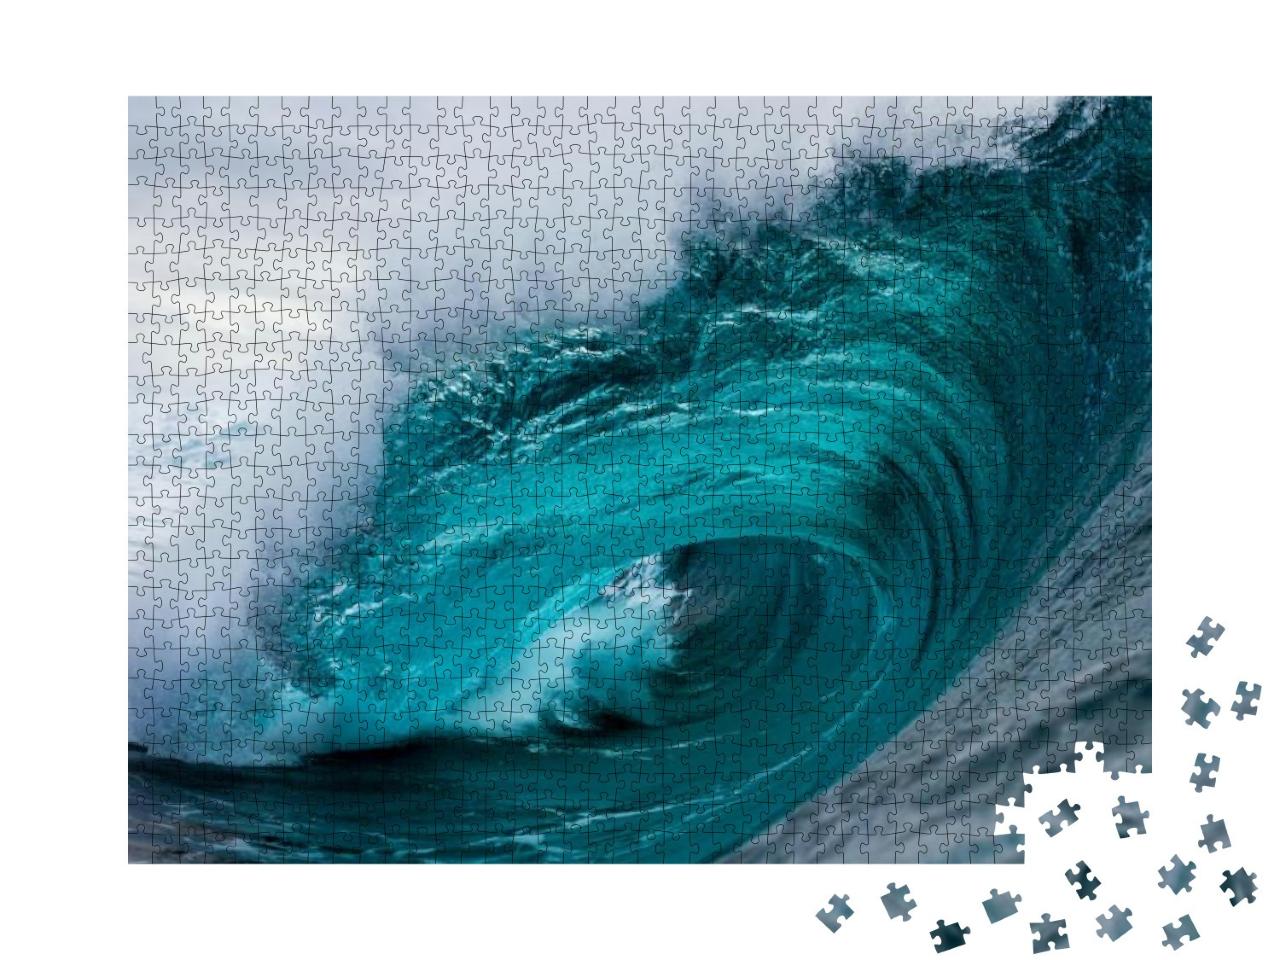 Big Crashing Wave... Jigsaw Puzzle with 1000 pieces